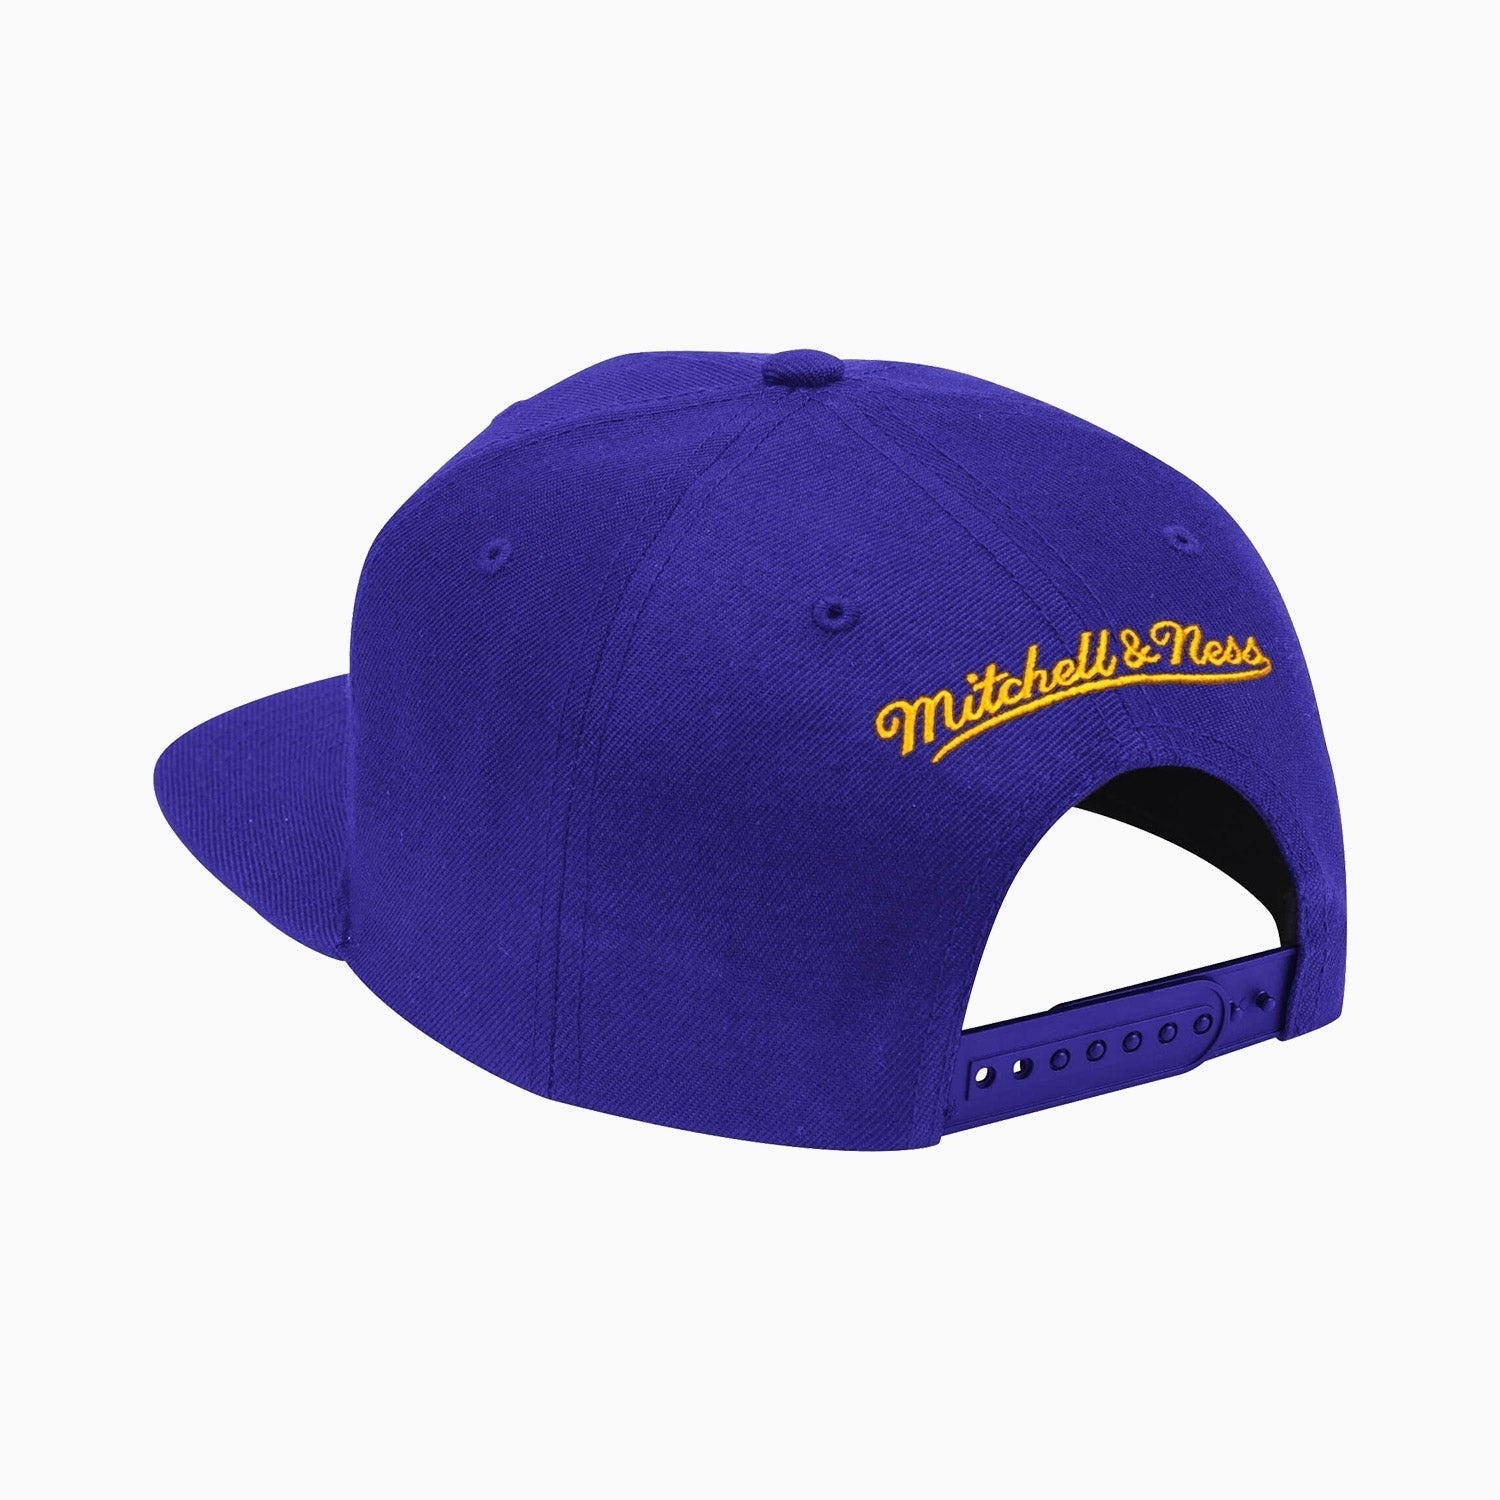 mitchell-and-ness-los-angeles-lakers-nba-snapback-hat-6hssmm18842-lalpurp